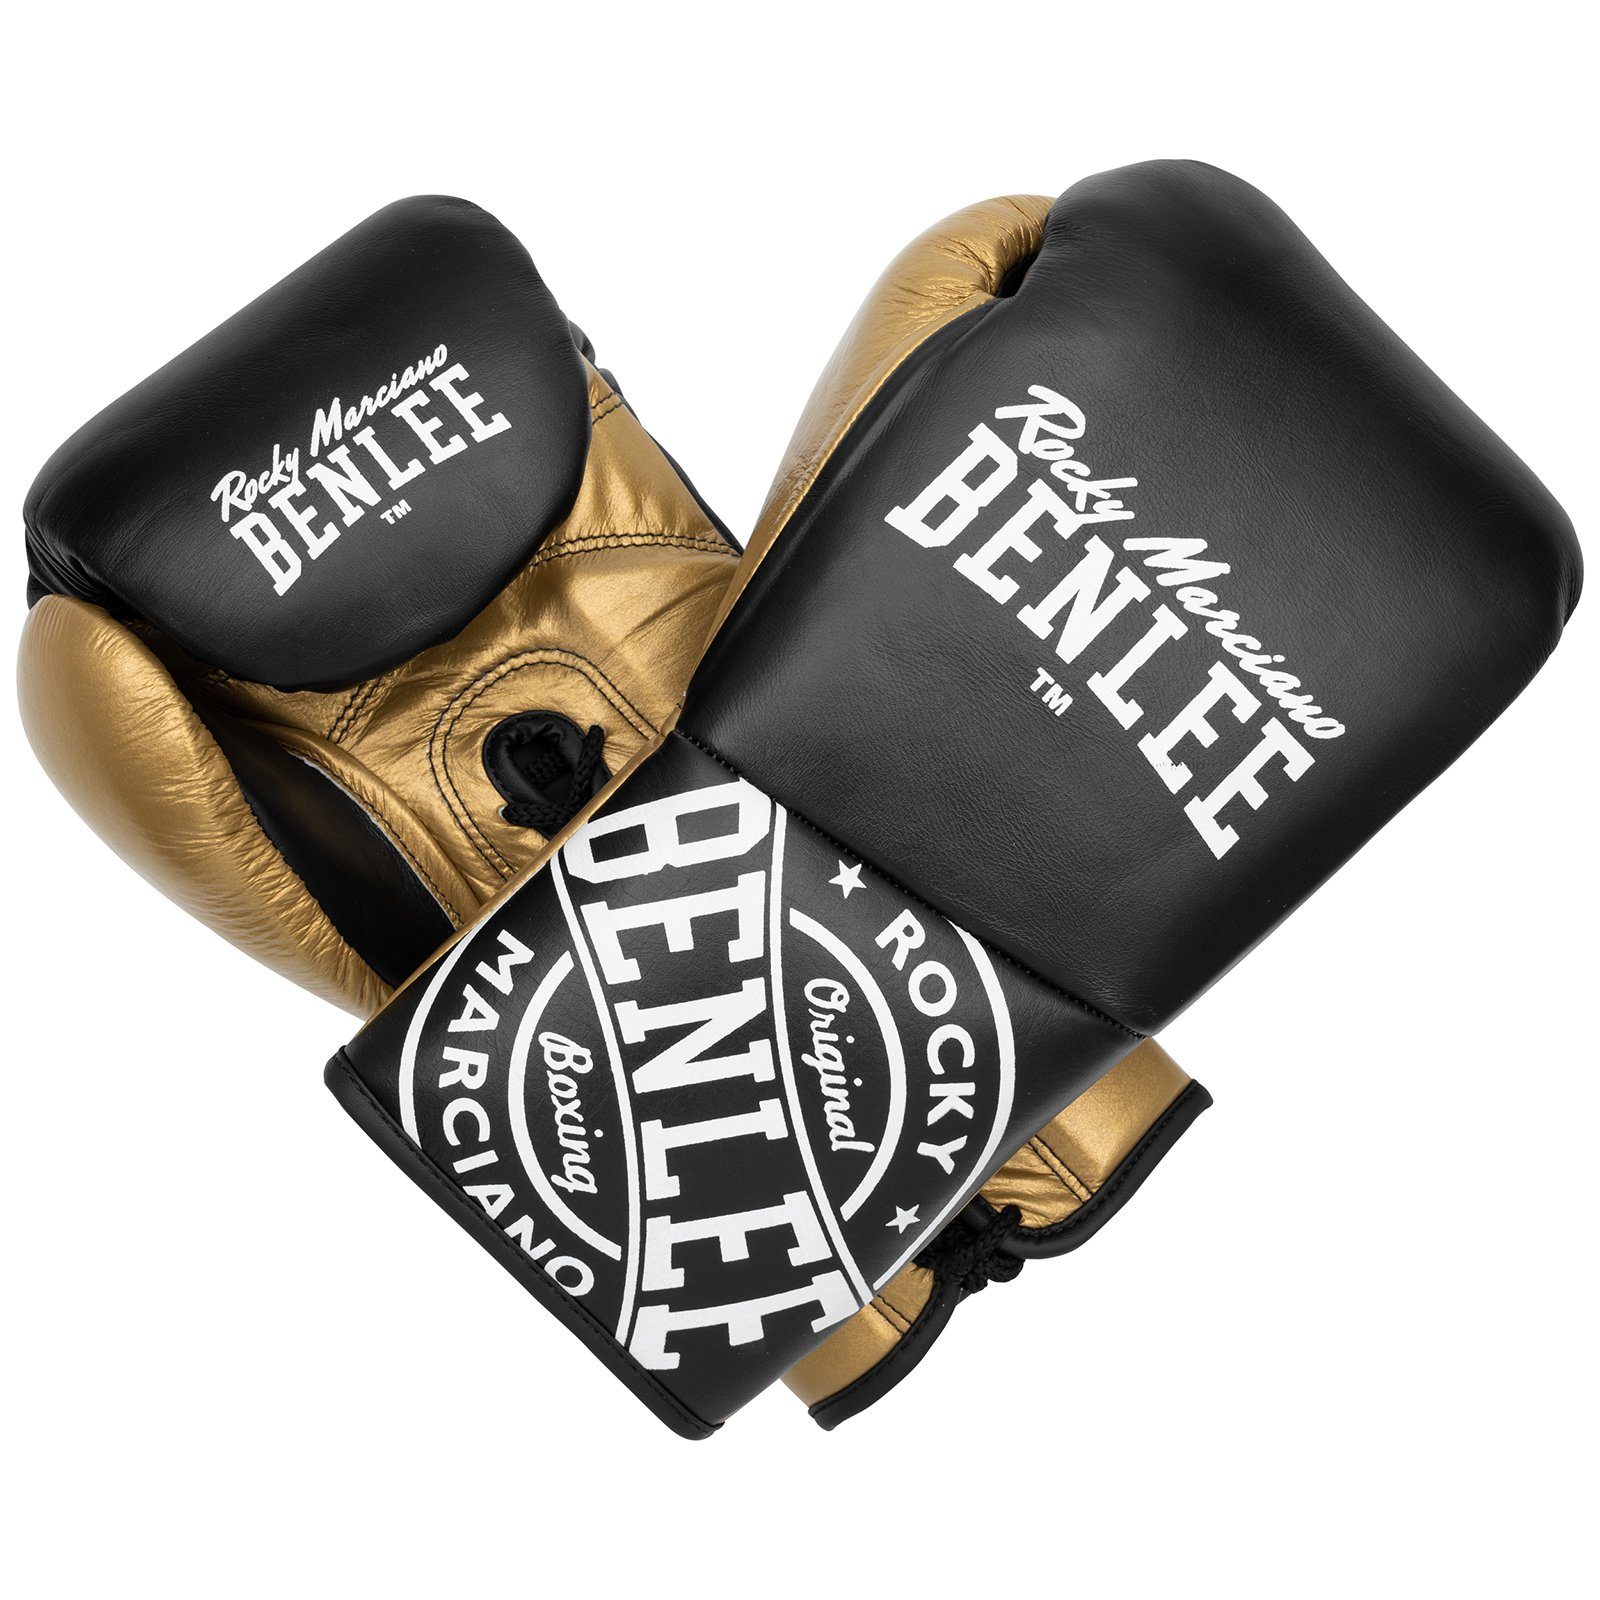 Rocky Benlee Marciano CYCLONE Boxhandschuhe Gold/White/Black